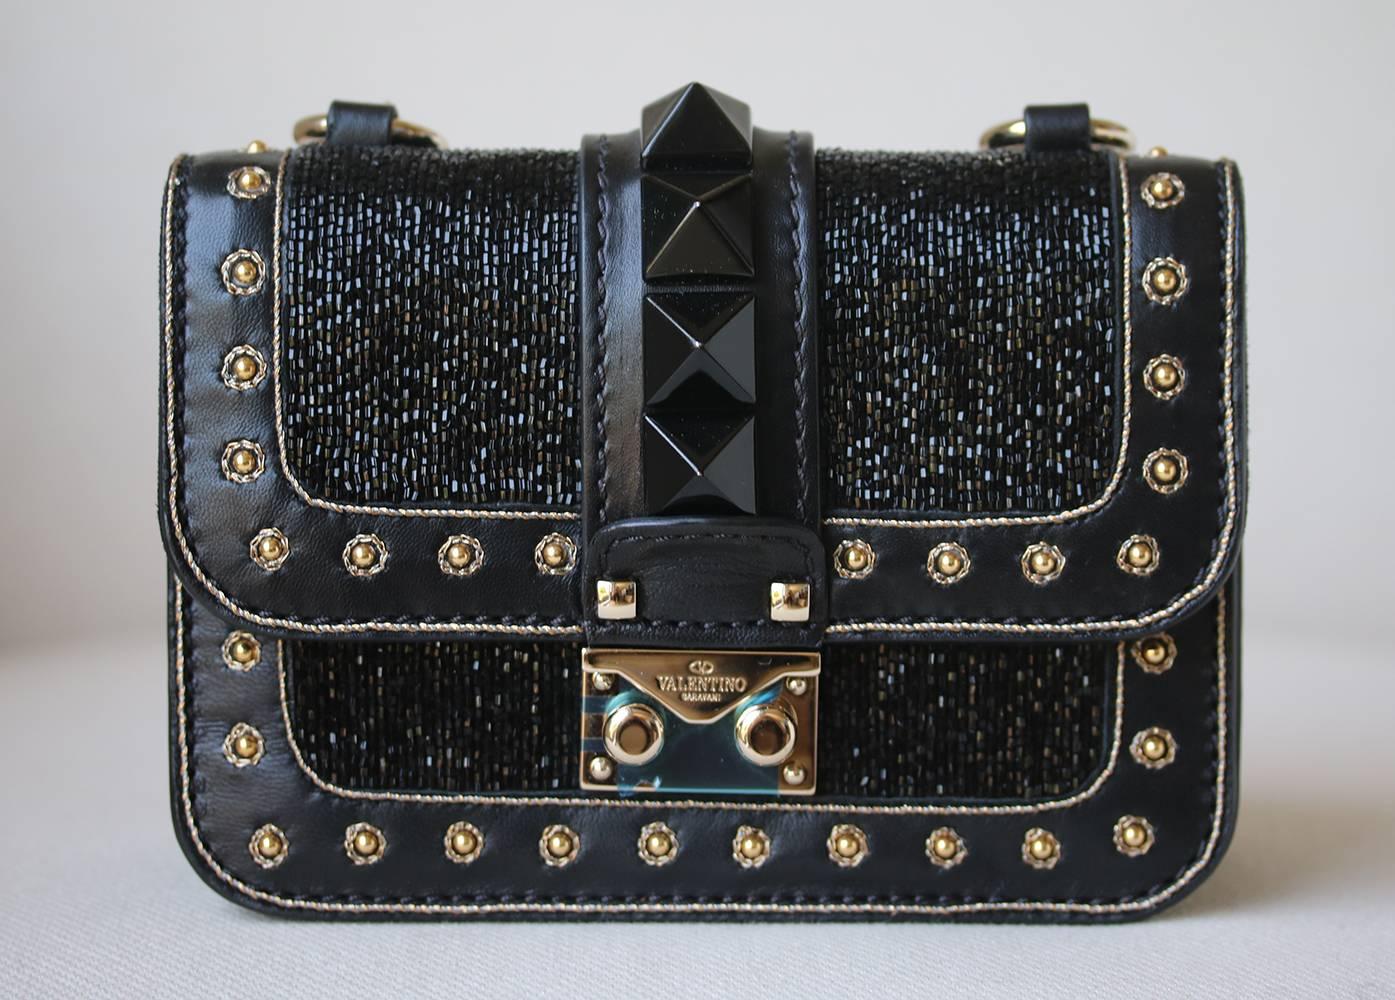 Valentino Mini Rockstud Bead Embellished Shoulder Bag. Black Leather Embellished With Beaded Body. Signature Pyramid Studs. Bordered With Gold Tone Studs. Gold Tone Hardware. Pushlock And Flap Closure. Back Slip Pocket. Suede Lined Interior.